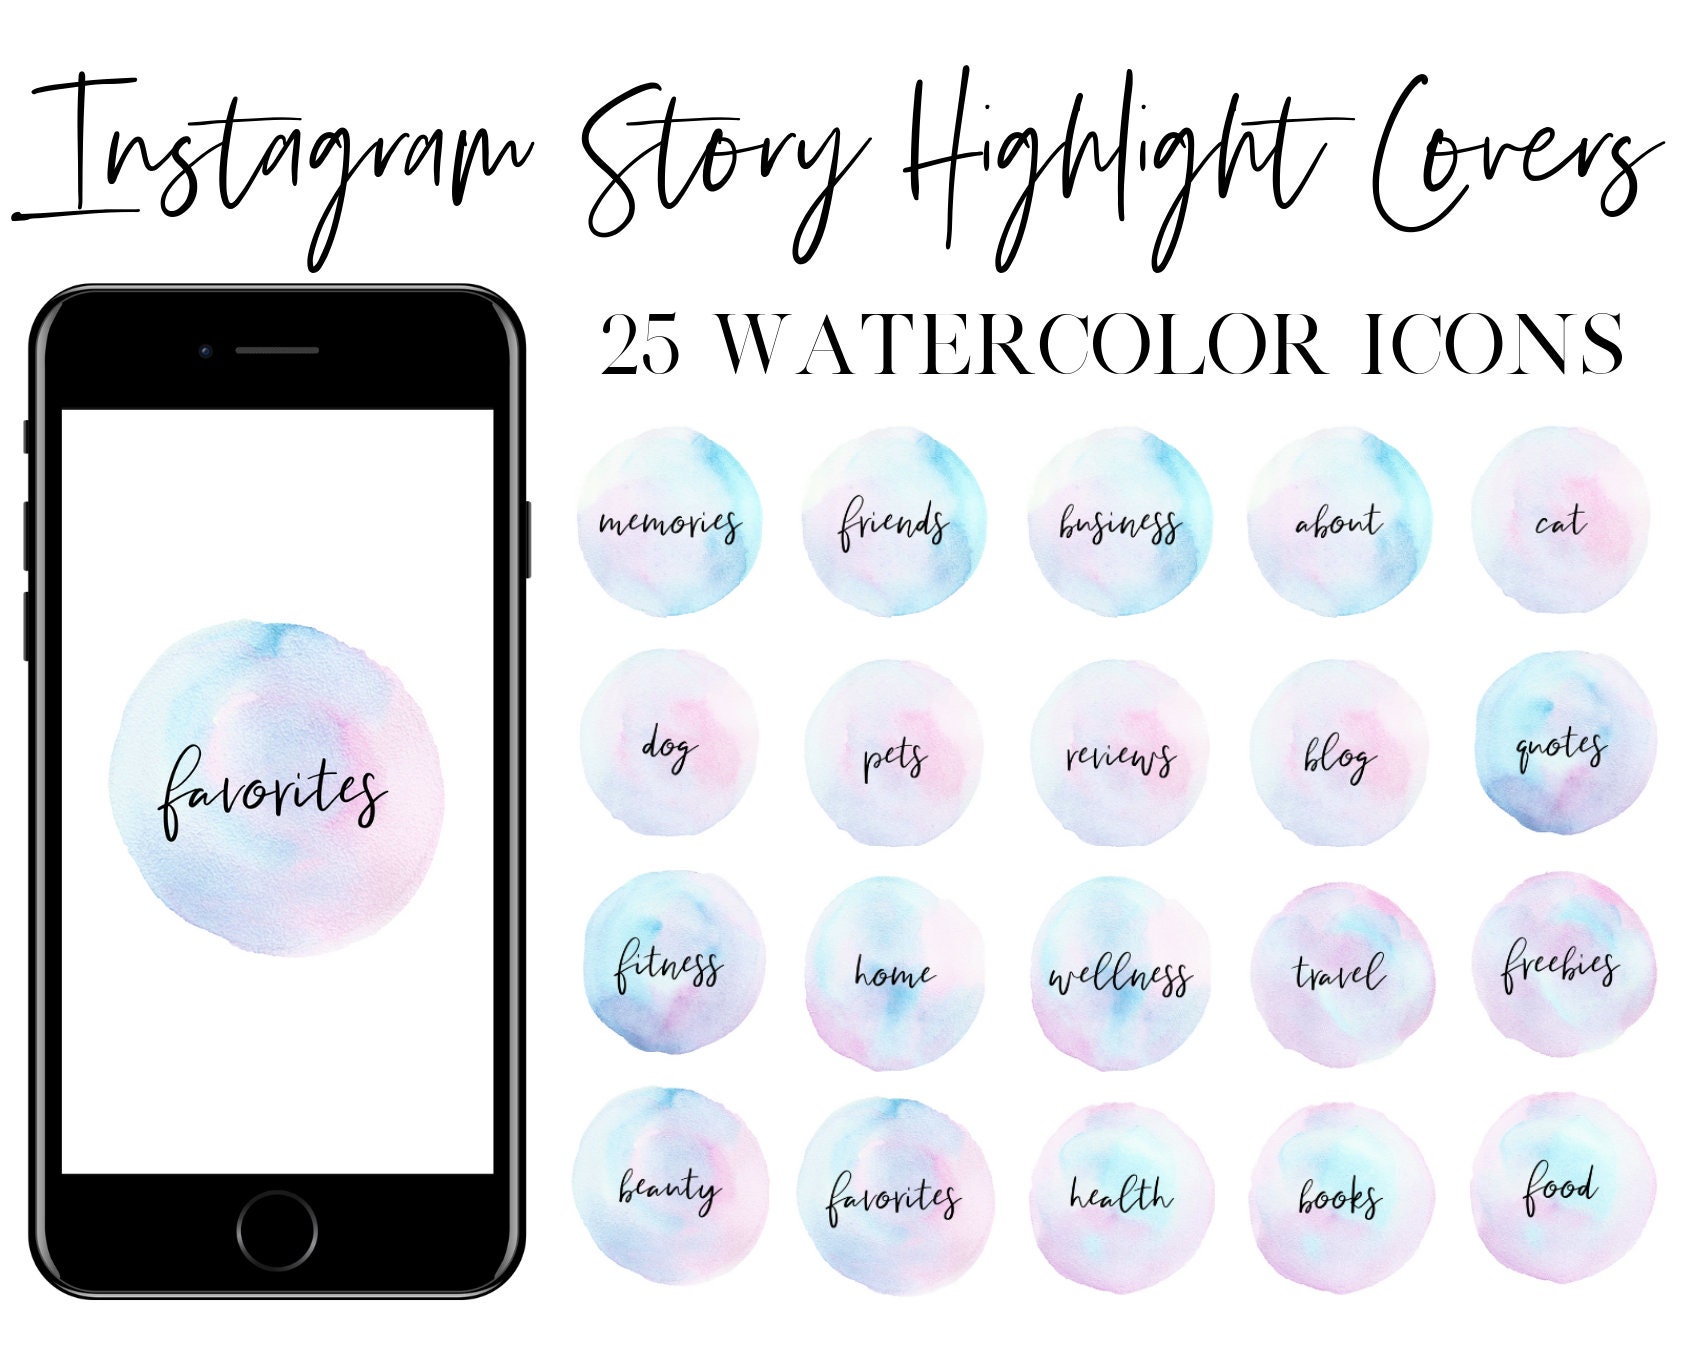 Instagram Story Highlight Covers Watercolor Script | Etsy